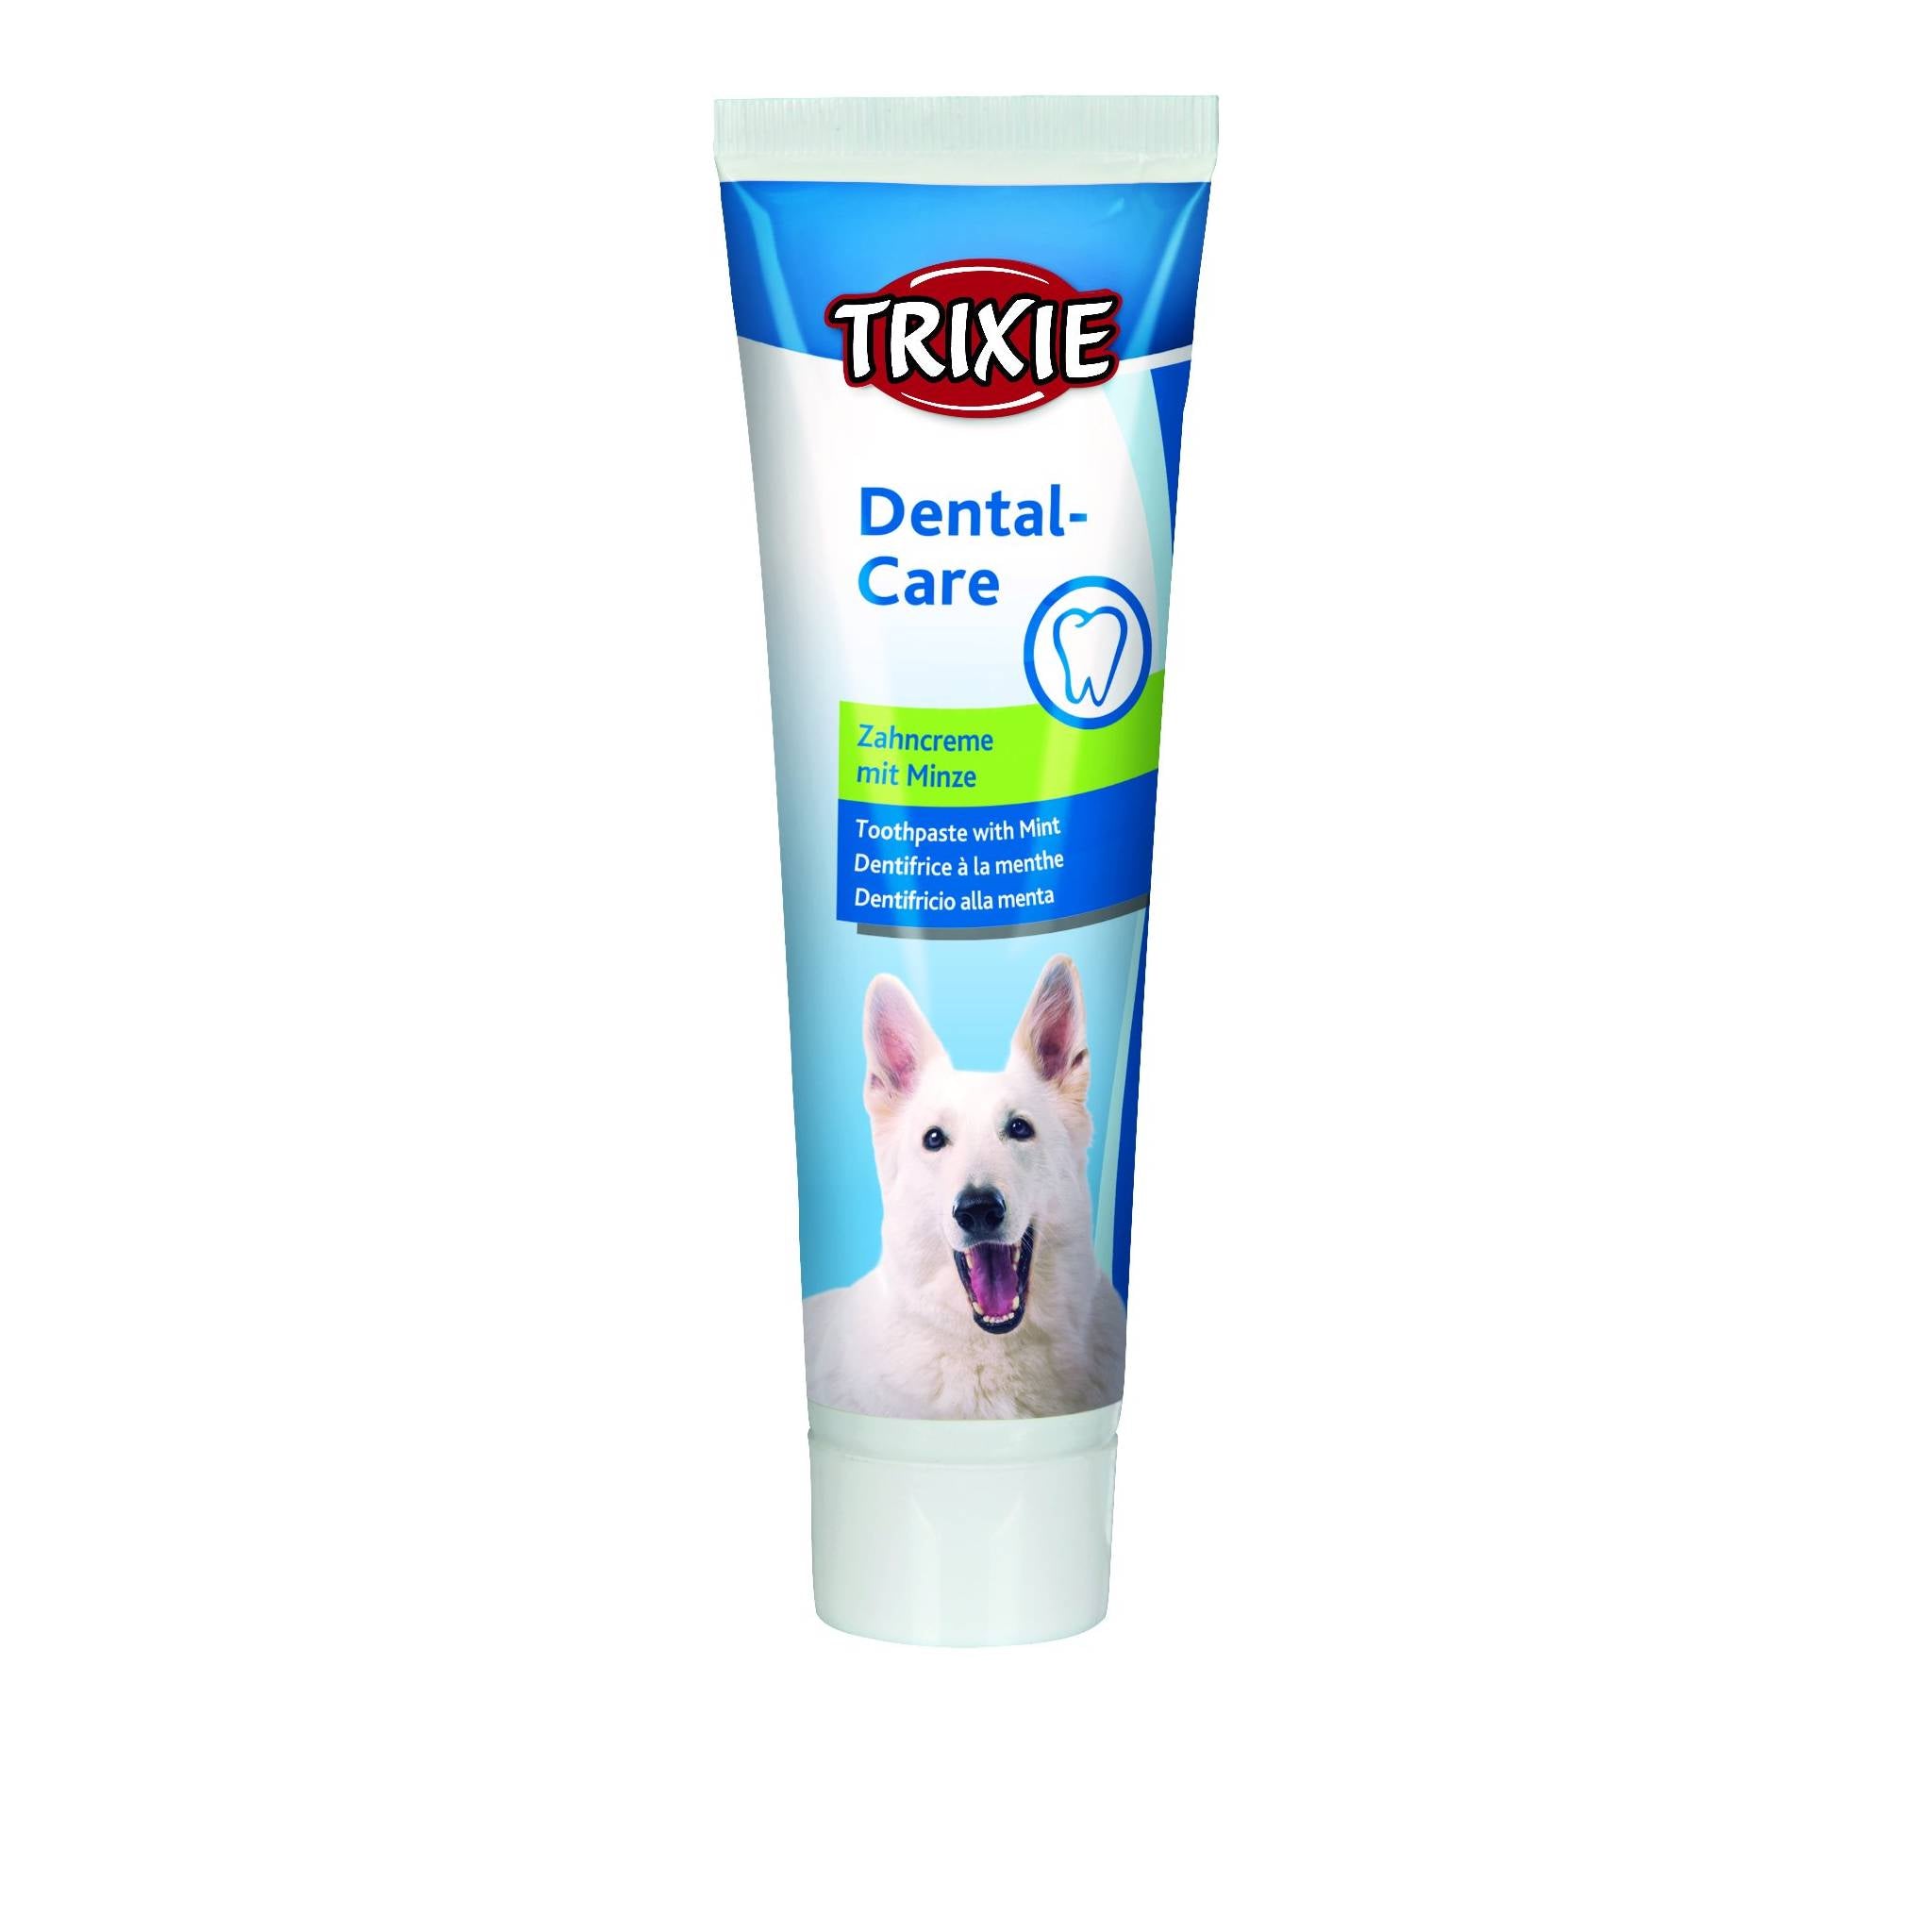 Trixie Dog Toothpaste with Mint - Pack of 3